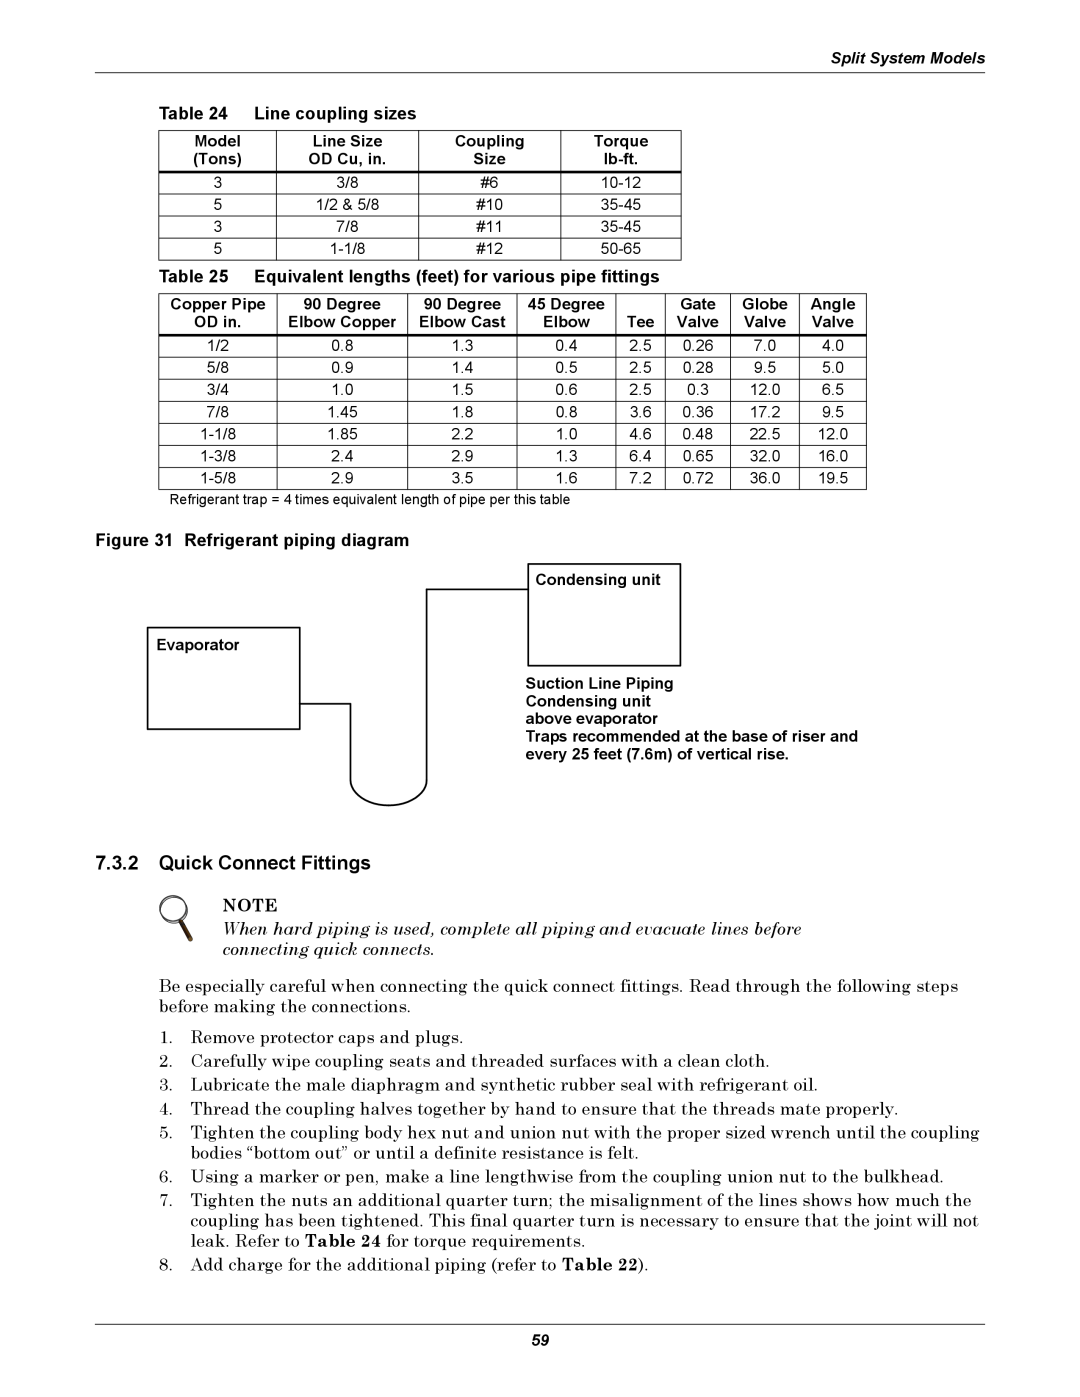 Emerson 3000 installation manual 7.3.2Quick Connect Fittings, Line coupling sizes, Refrigerant piping diagram 